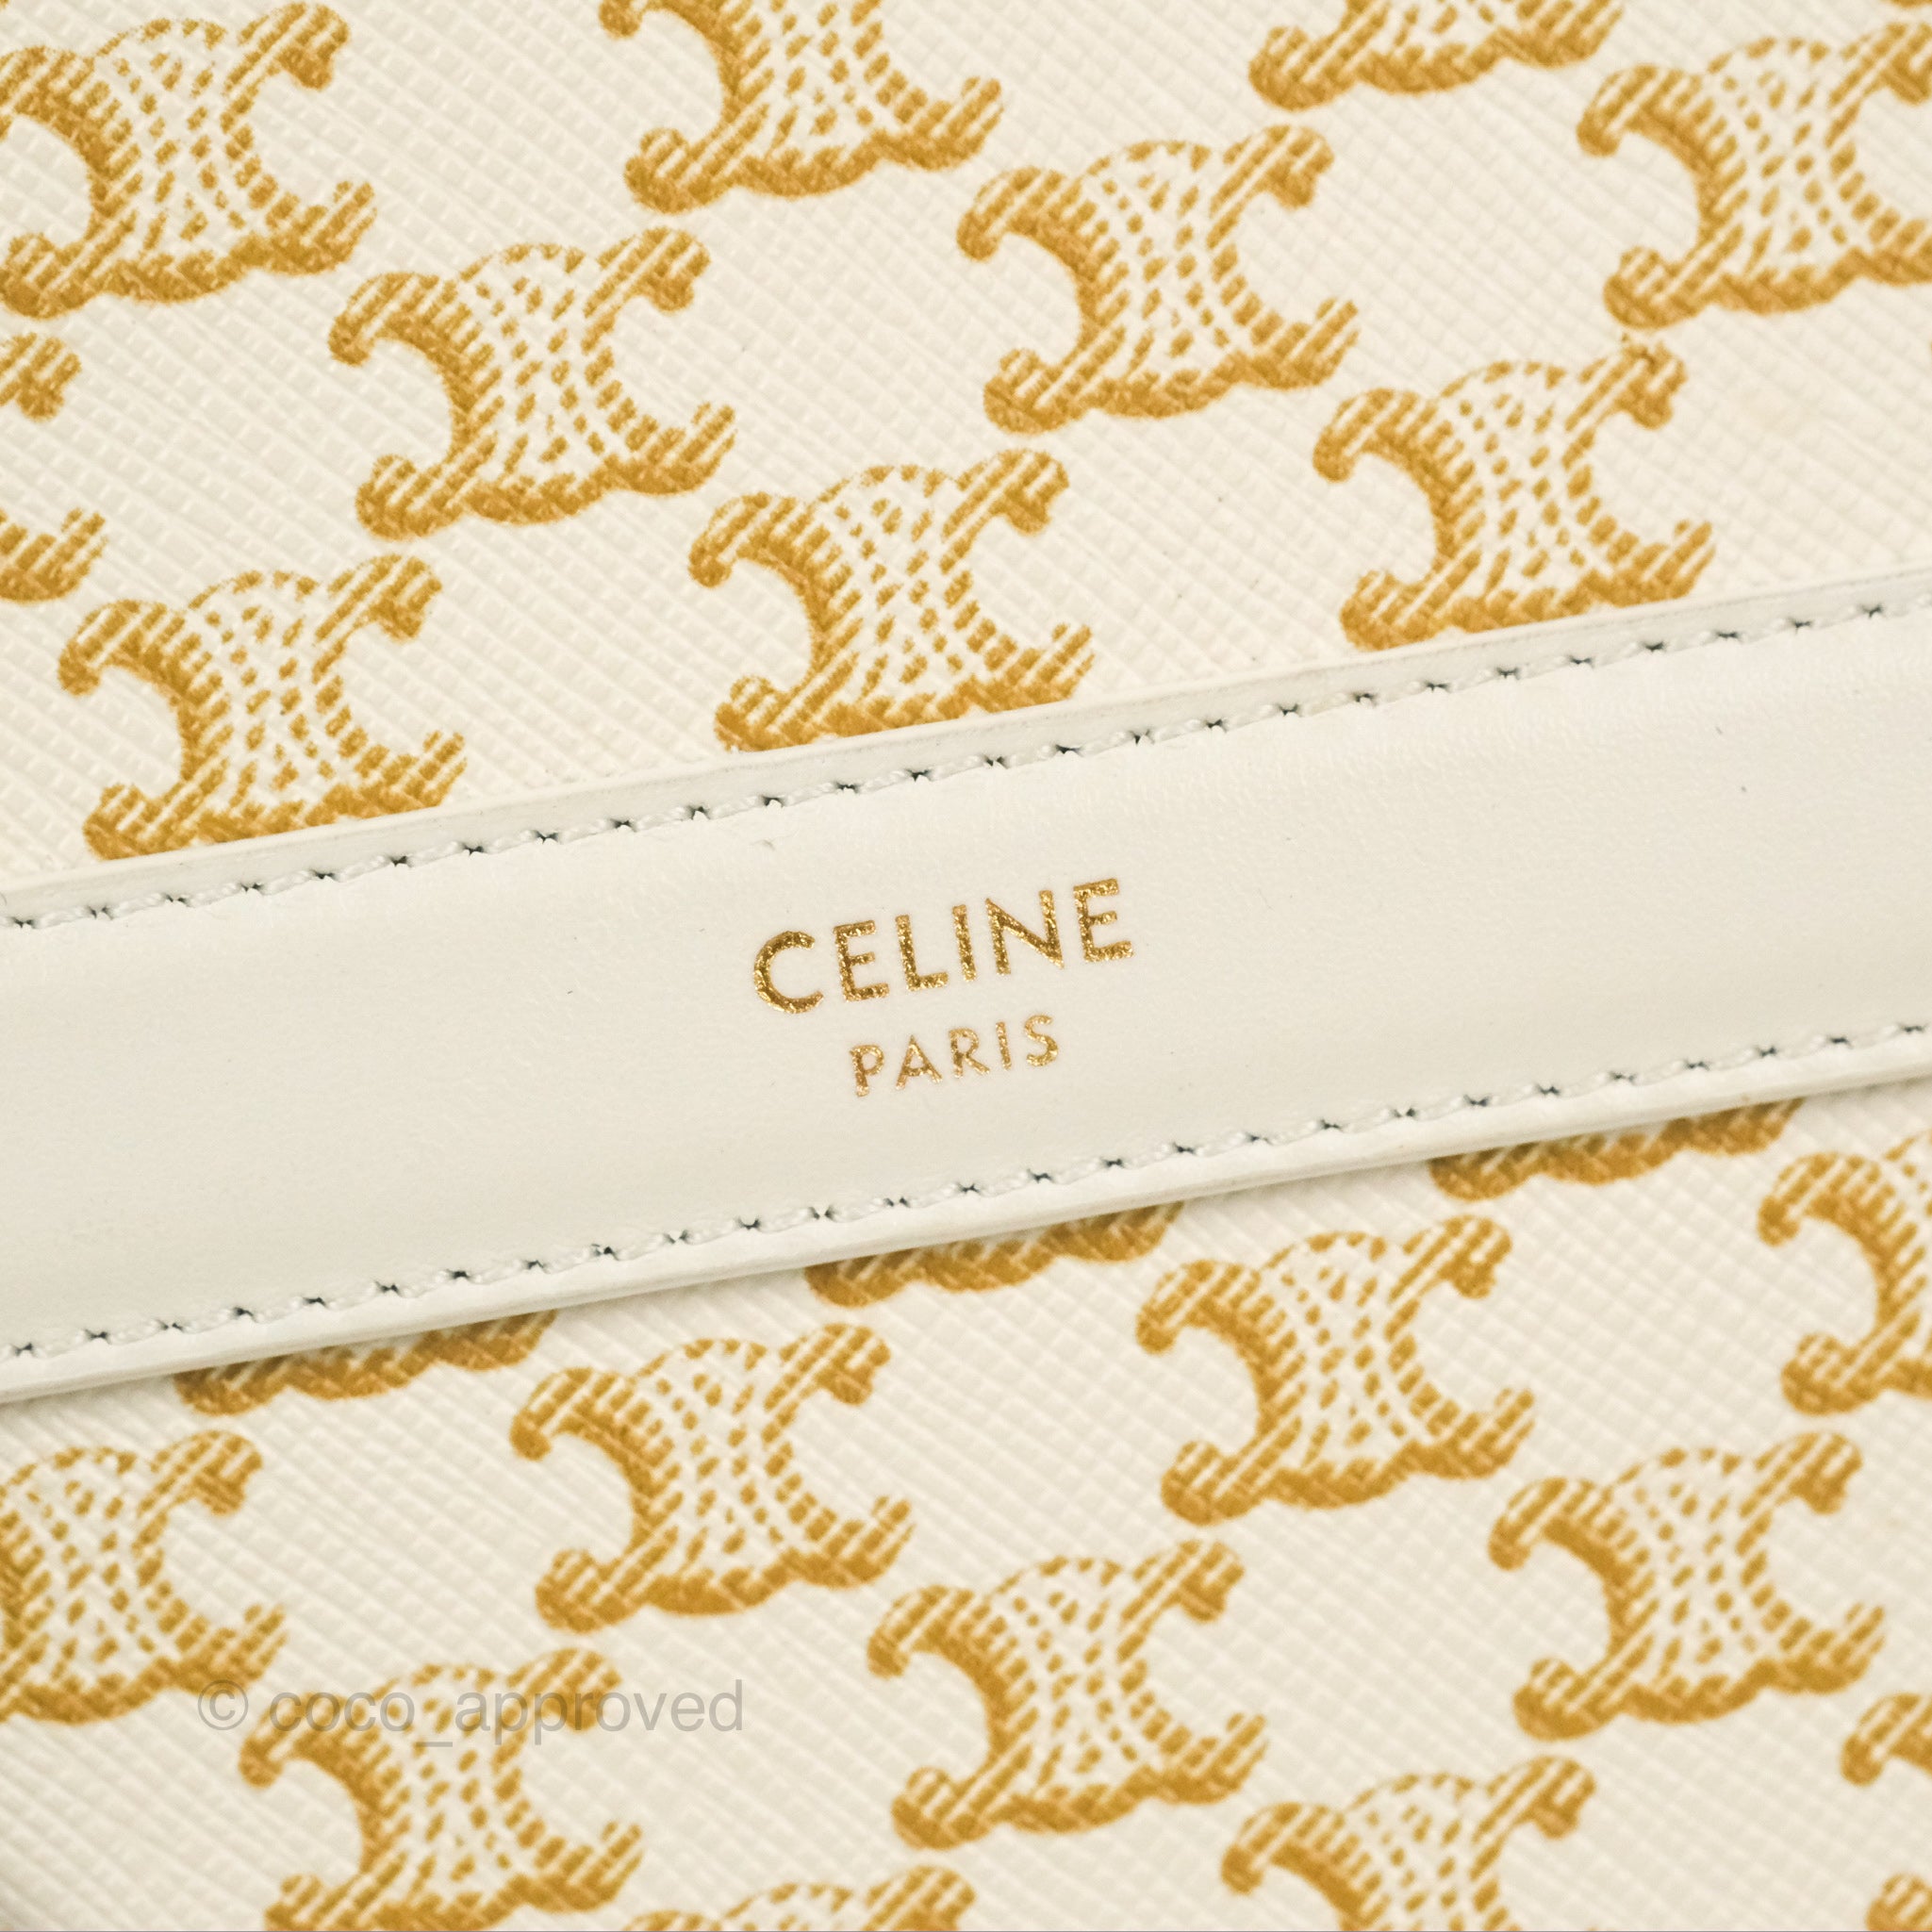 Celine's Triomphe Bag Already Has The Stamp Of Approval From These